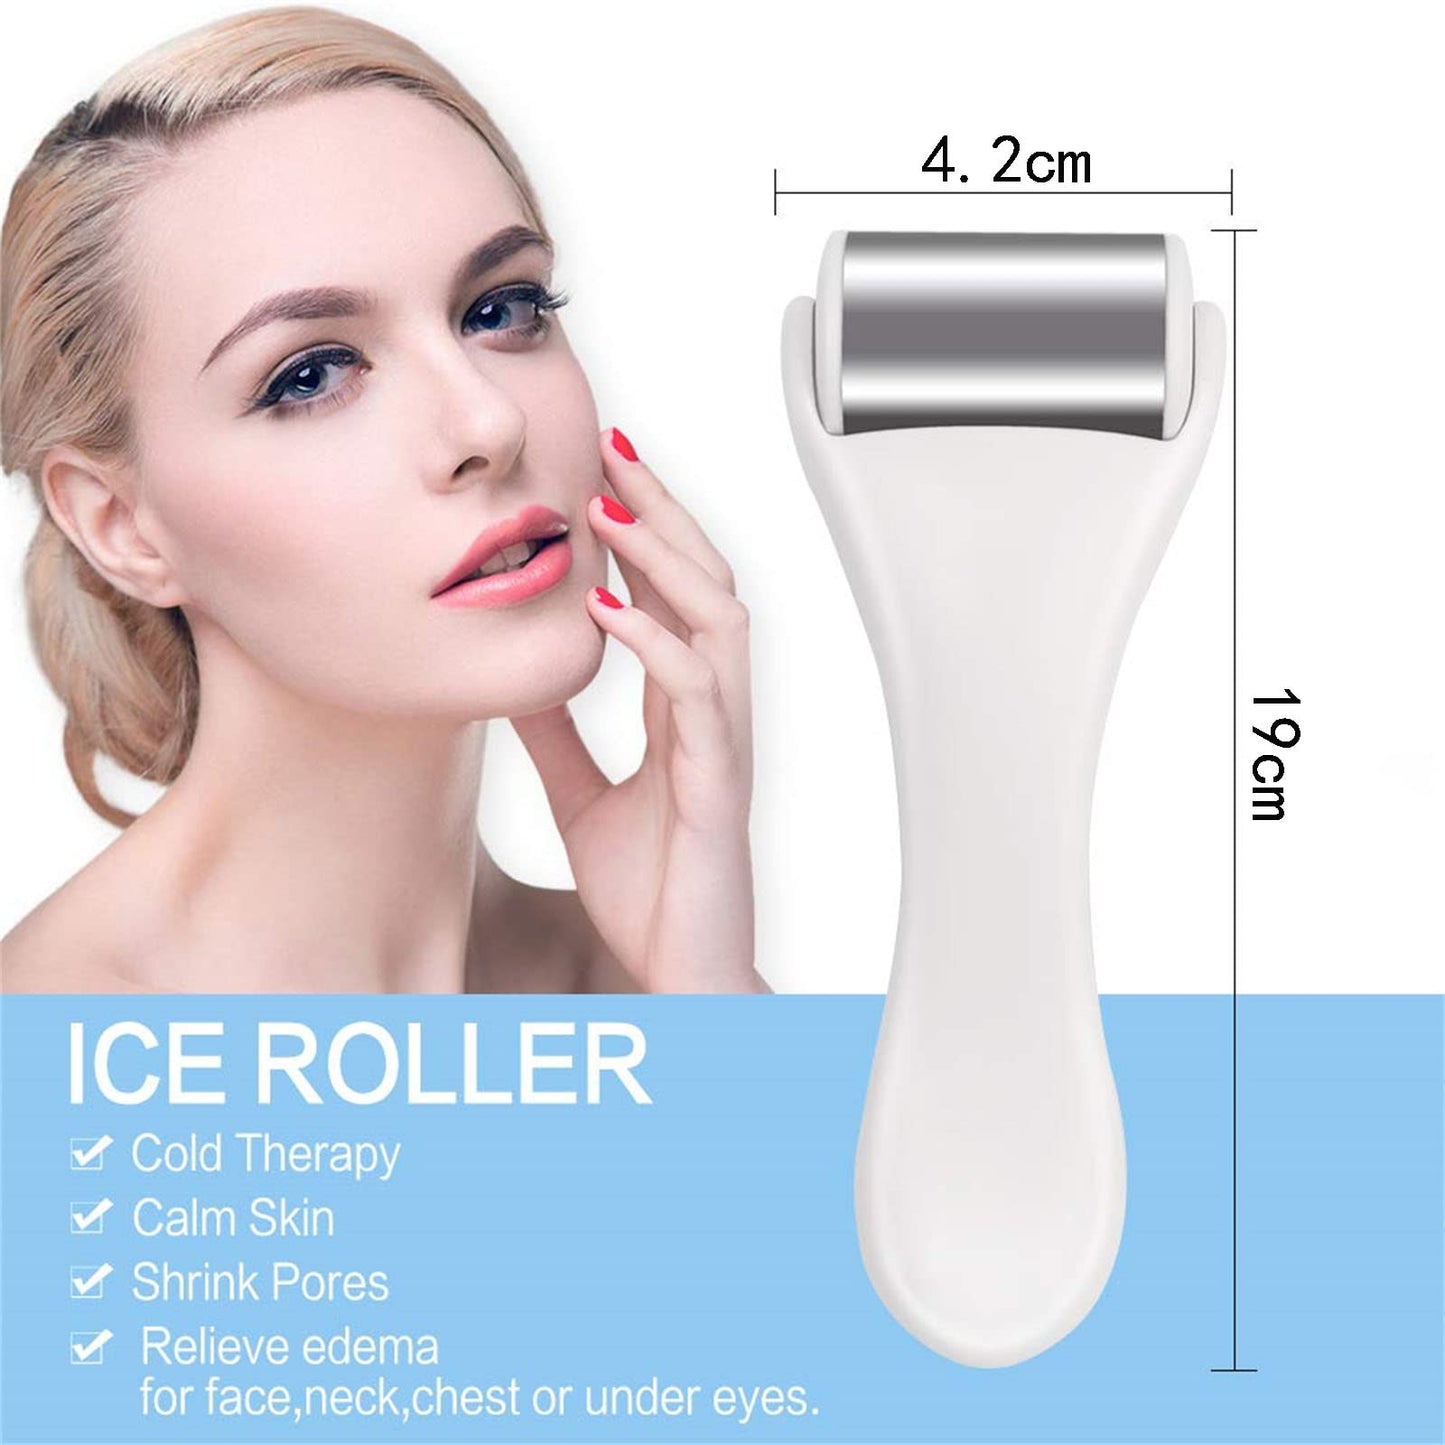 Arabest Ice Roller for Face and Eye, Stainless Steel Face Massager Ice Roller Massager, Cold Facial Roller Skincare for Eye Bags, Redness, Headaches, Puffiness, Migraine and Pain Relief (White)